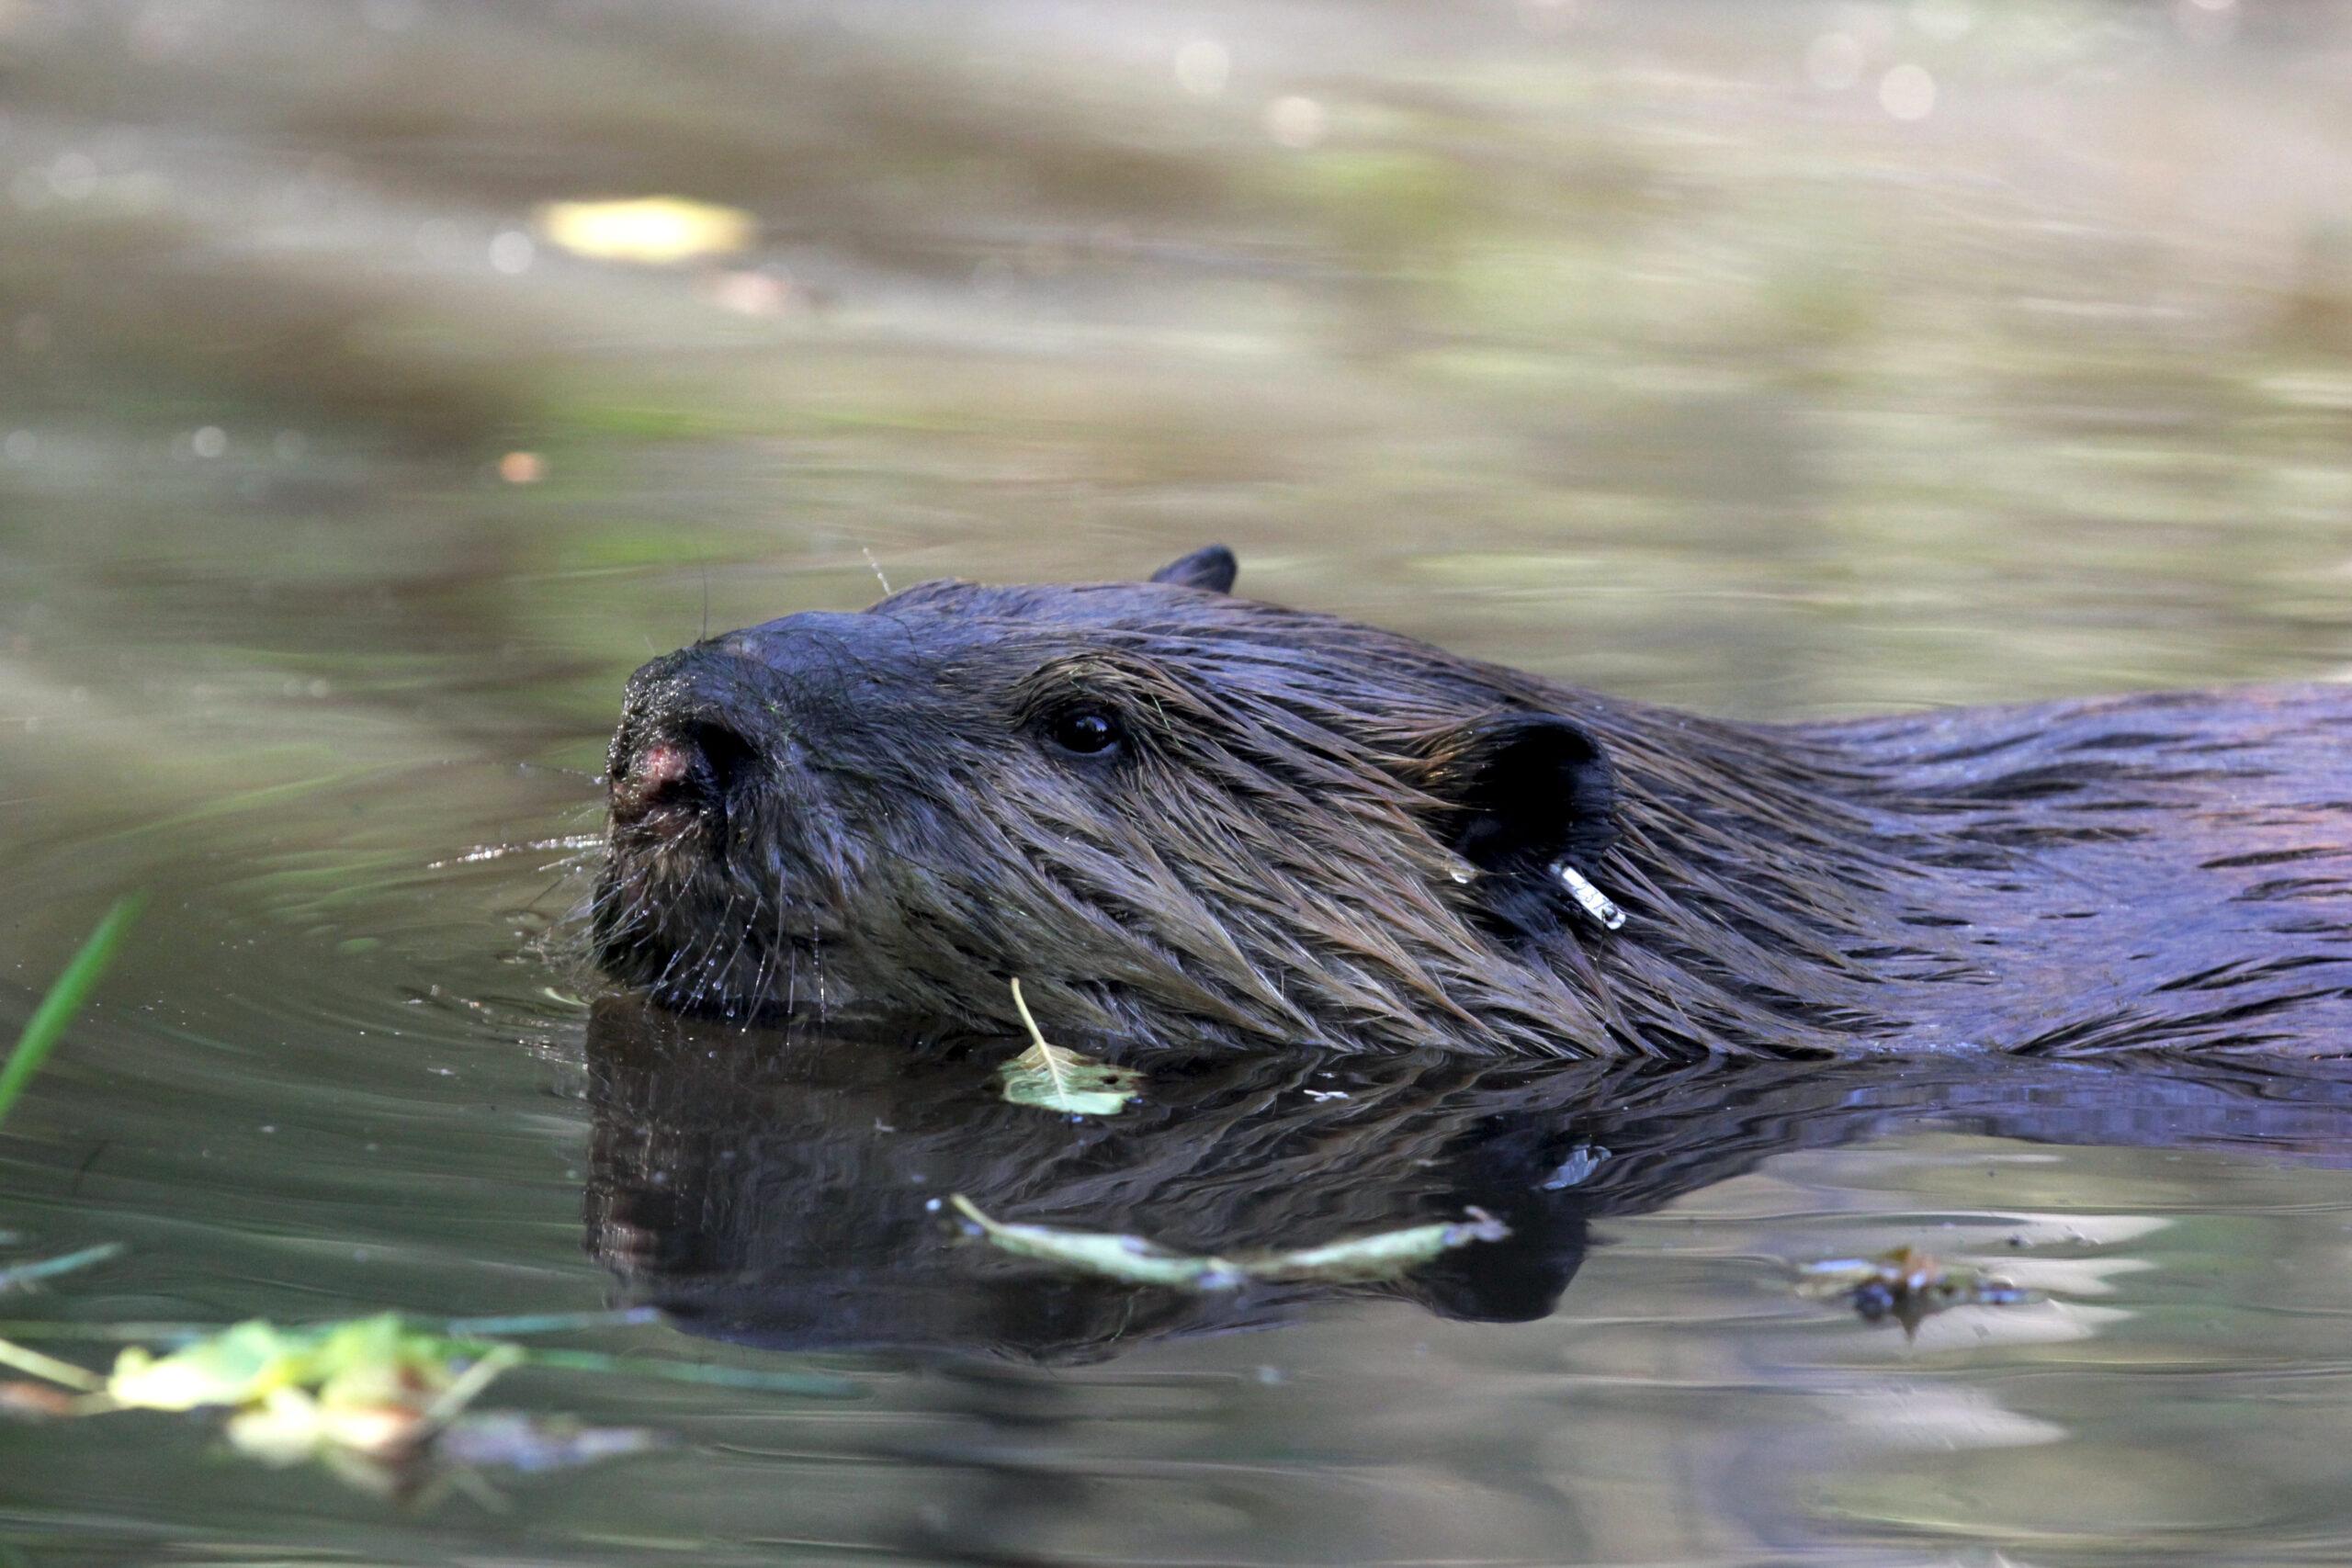 Beavers to the Rescue